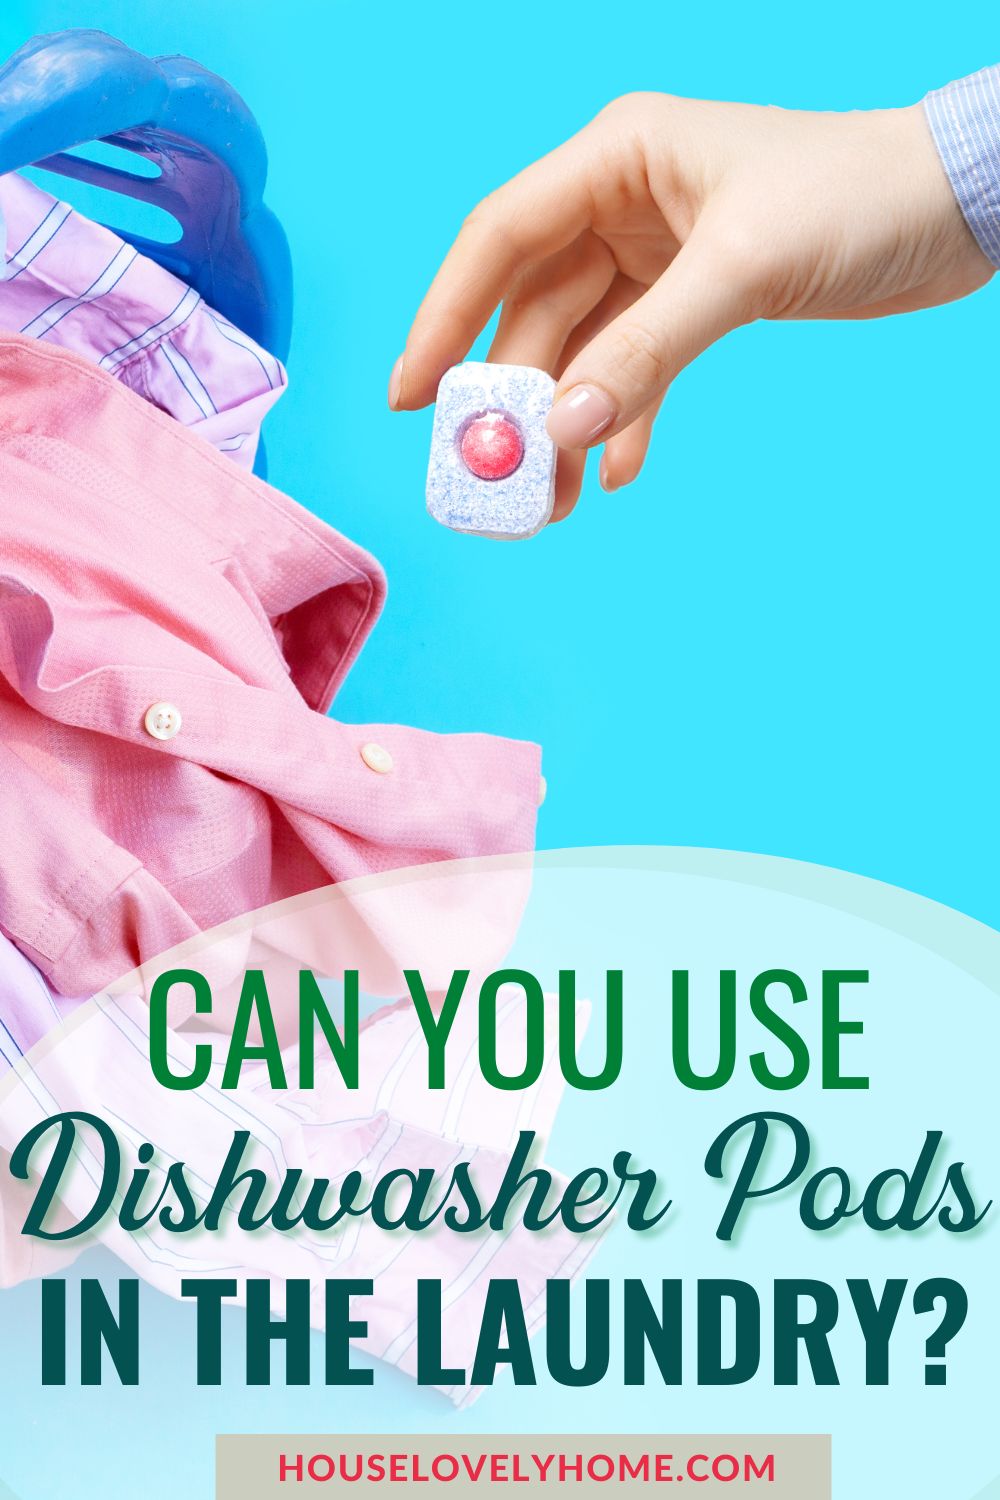 A blue laundry basket with shirts in blue background with text overlay that reads Can You Use Dishwasher Pods in the Laundry